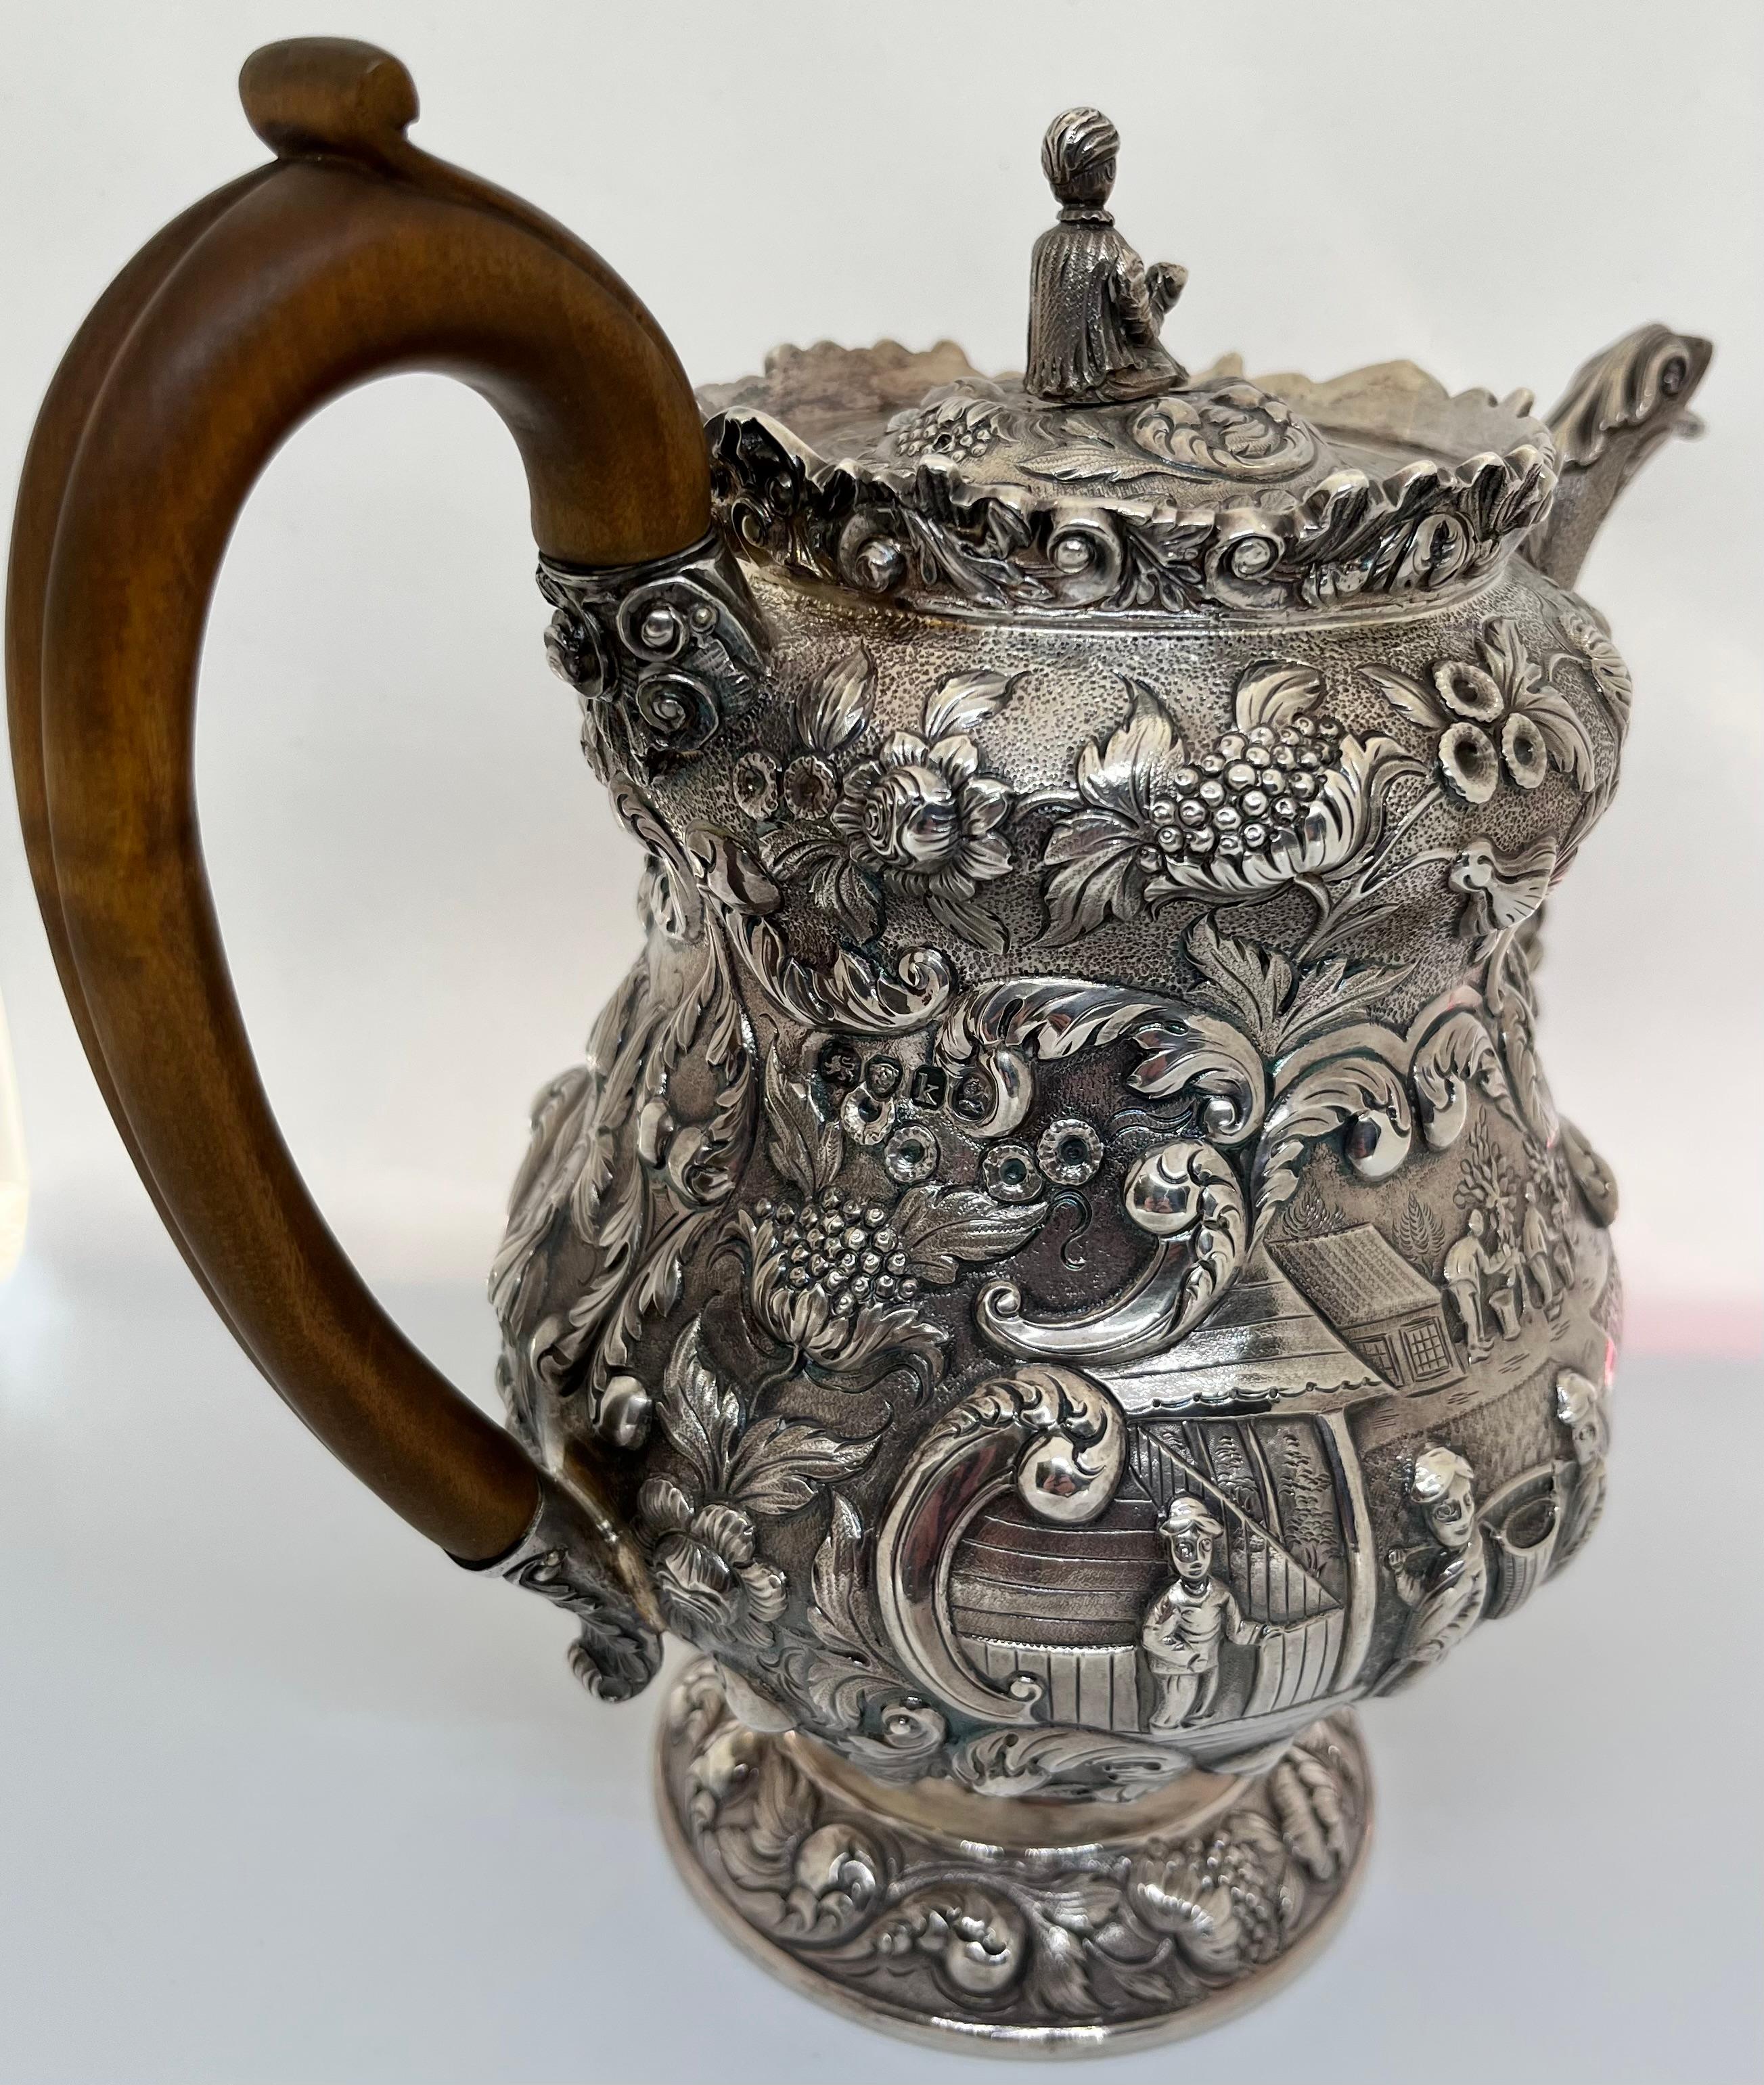 A fine quality and extremely rare George IV sterling silver Regency tea or coffee pot, profusely and skilfully decorated with panels of pastoral scenes depicting the Chinese tea harvest with figures picking tea leaf plants, sorting and transporting